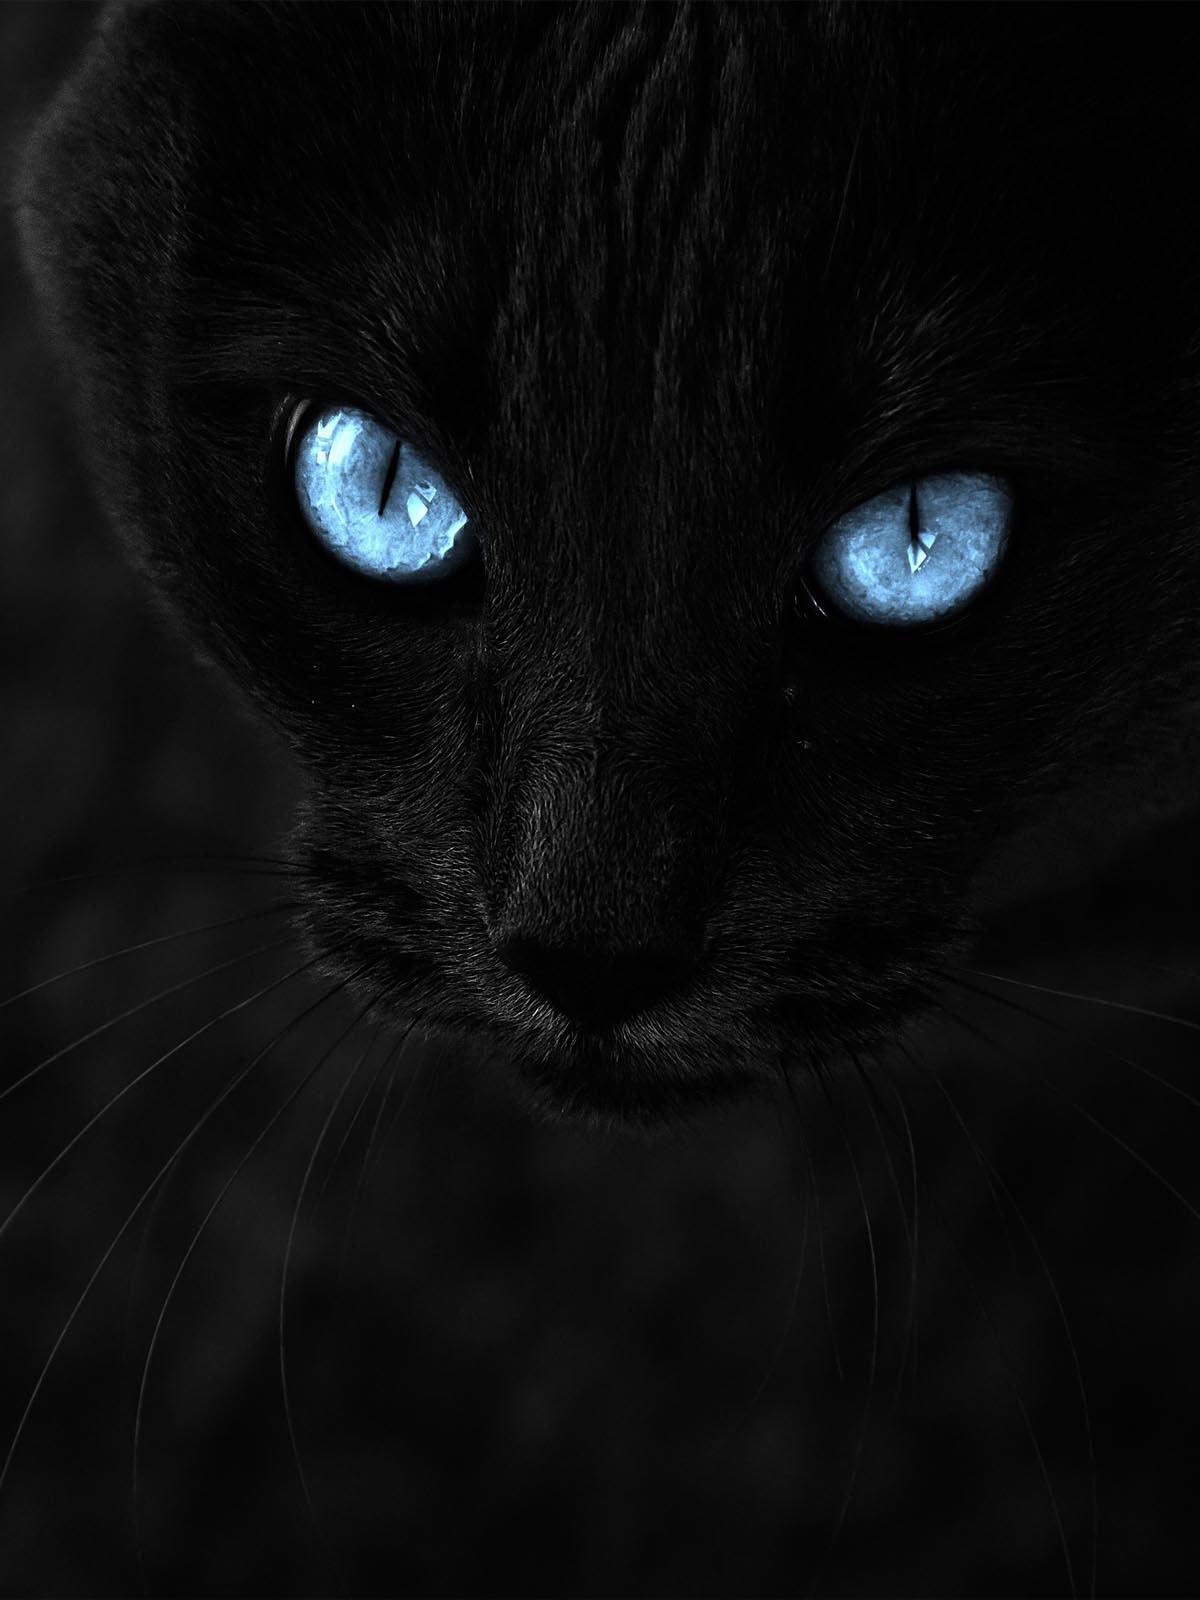 Download wallpaper 1280x2120 black cat fire eyes fantasy iphone 6 plus  1280x2120 hd background 26970